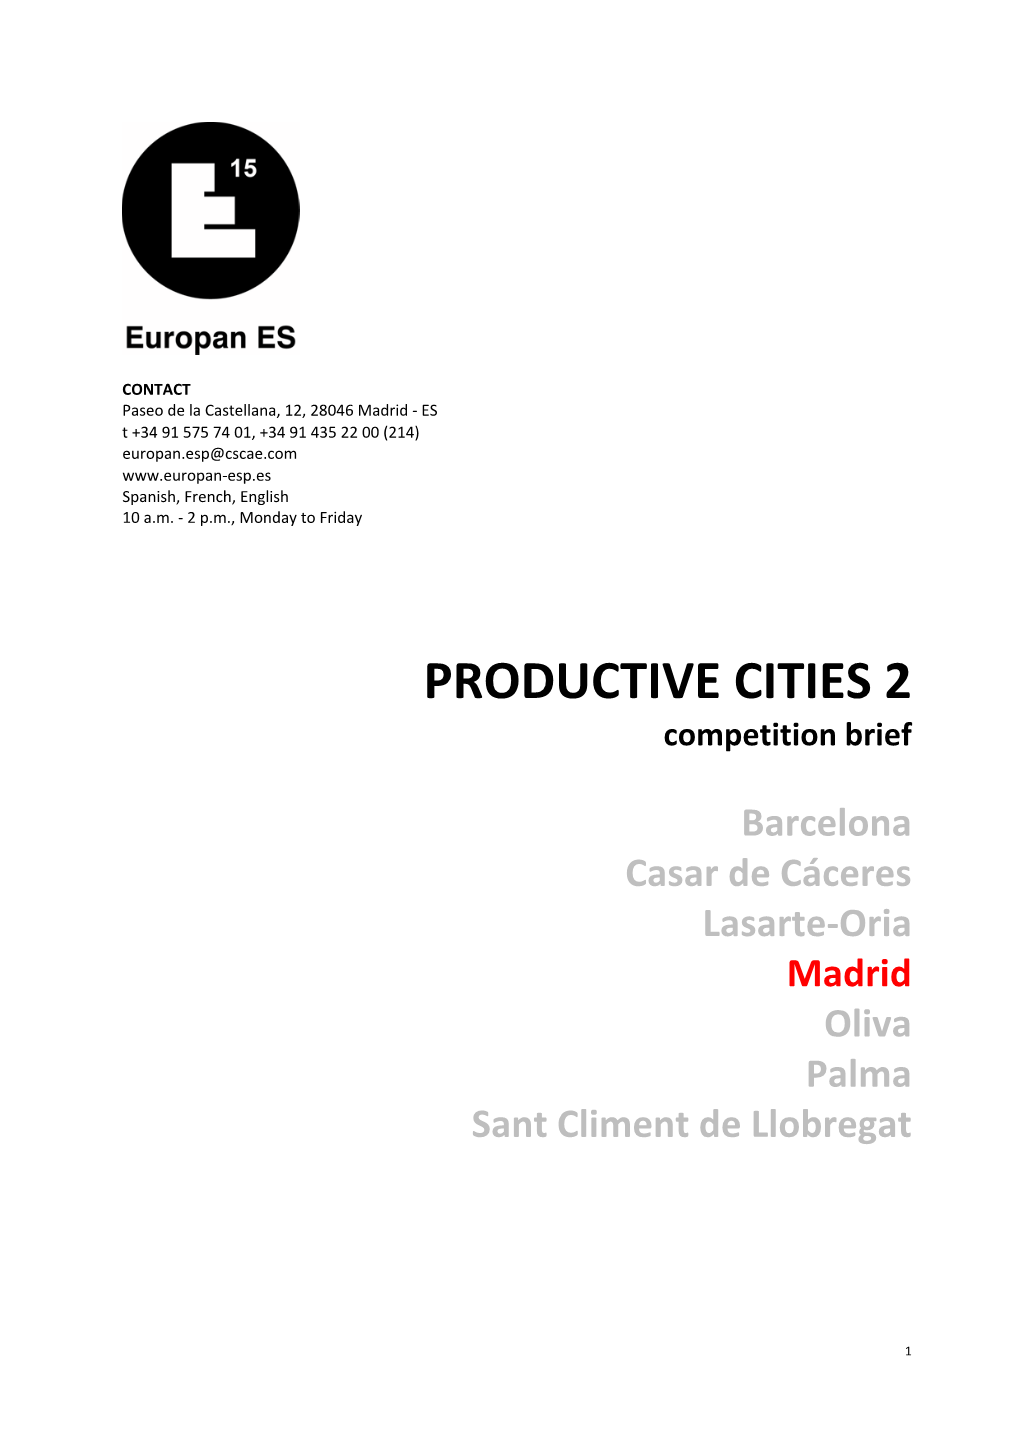 PRODUCTIVE CITIES 2 Competition Brief